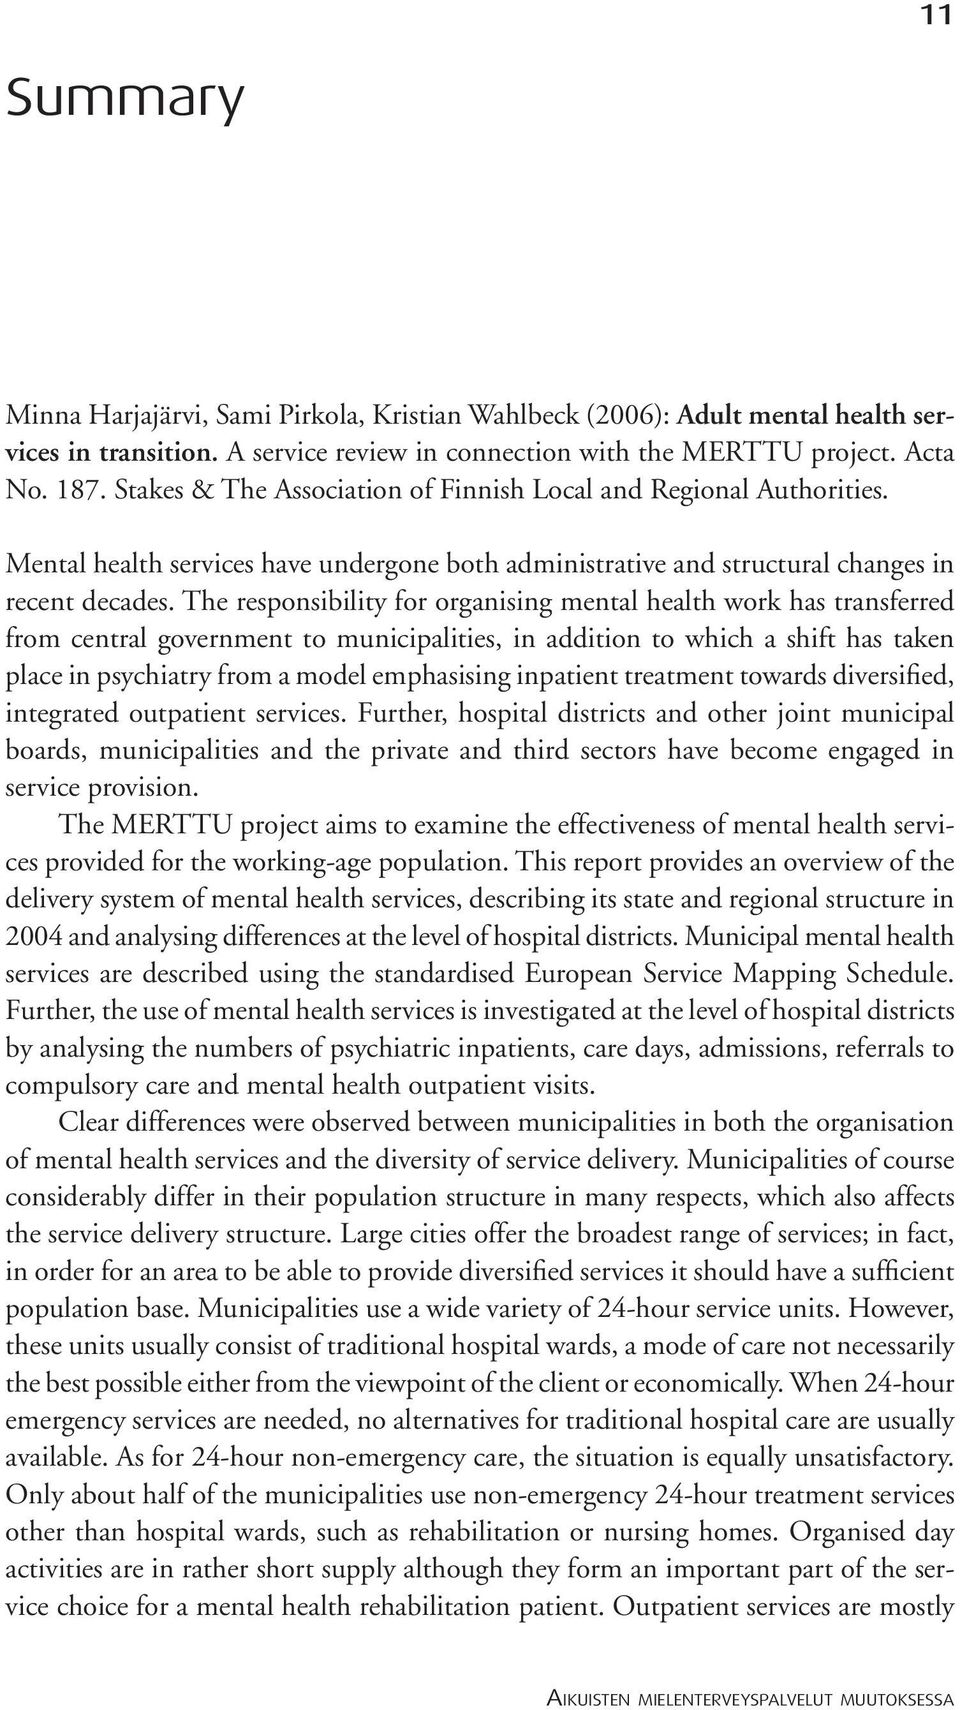 The responsibility for organising mental health work has transferred from central government to municipalities, in addition to which a shift has taken place in psychiatry from a model emphasising